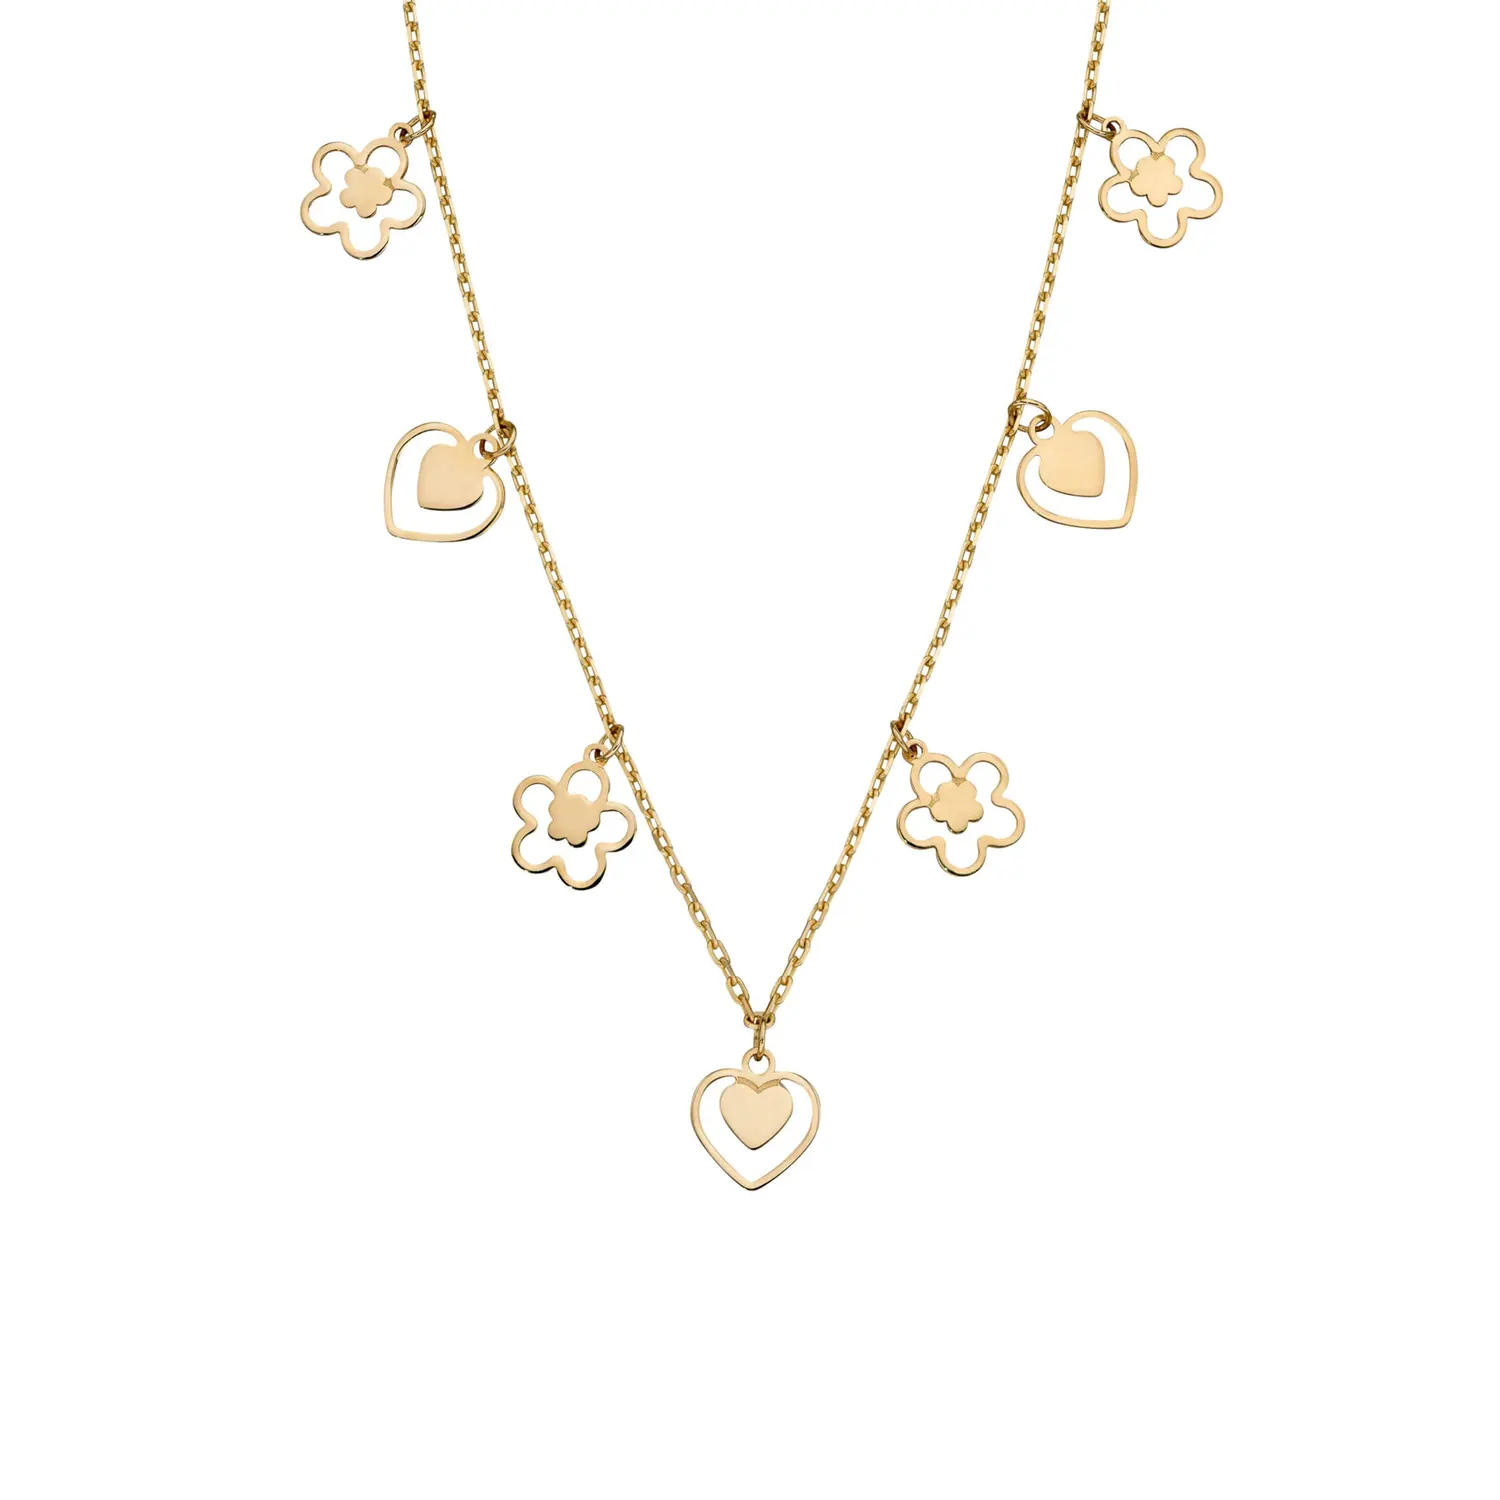 Yellow Gold Heart & Flower Charm Necklace